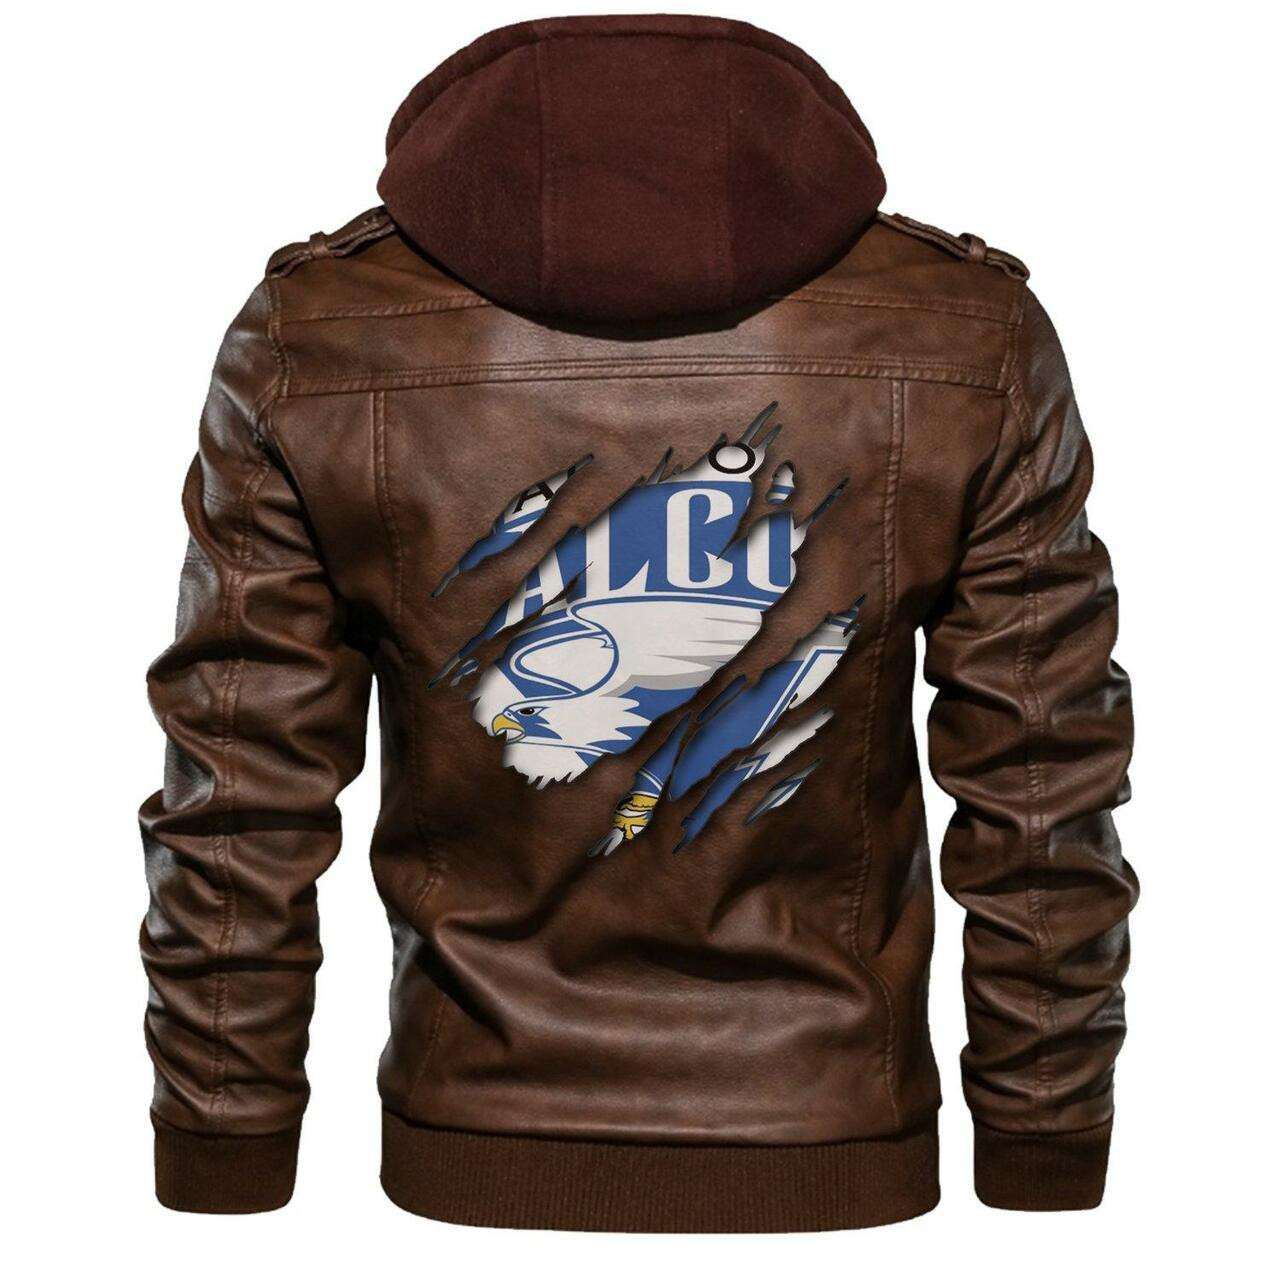 Top 200+ leather jacket so cool for your man 407